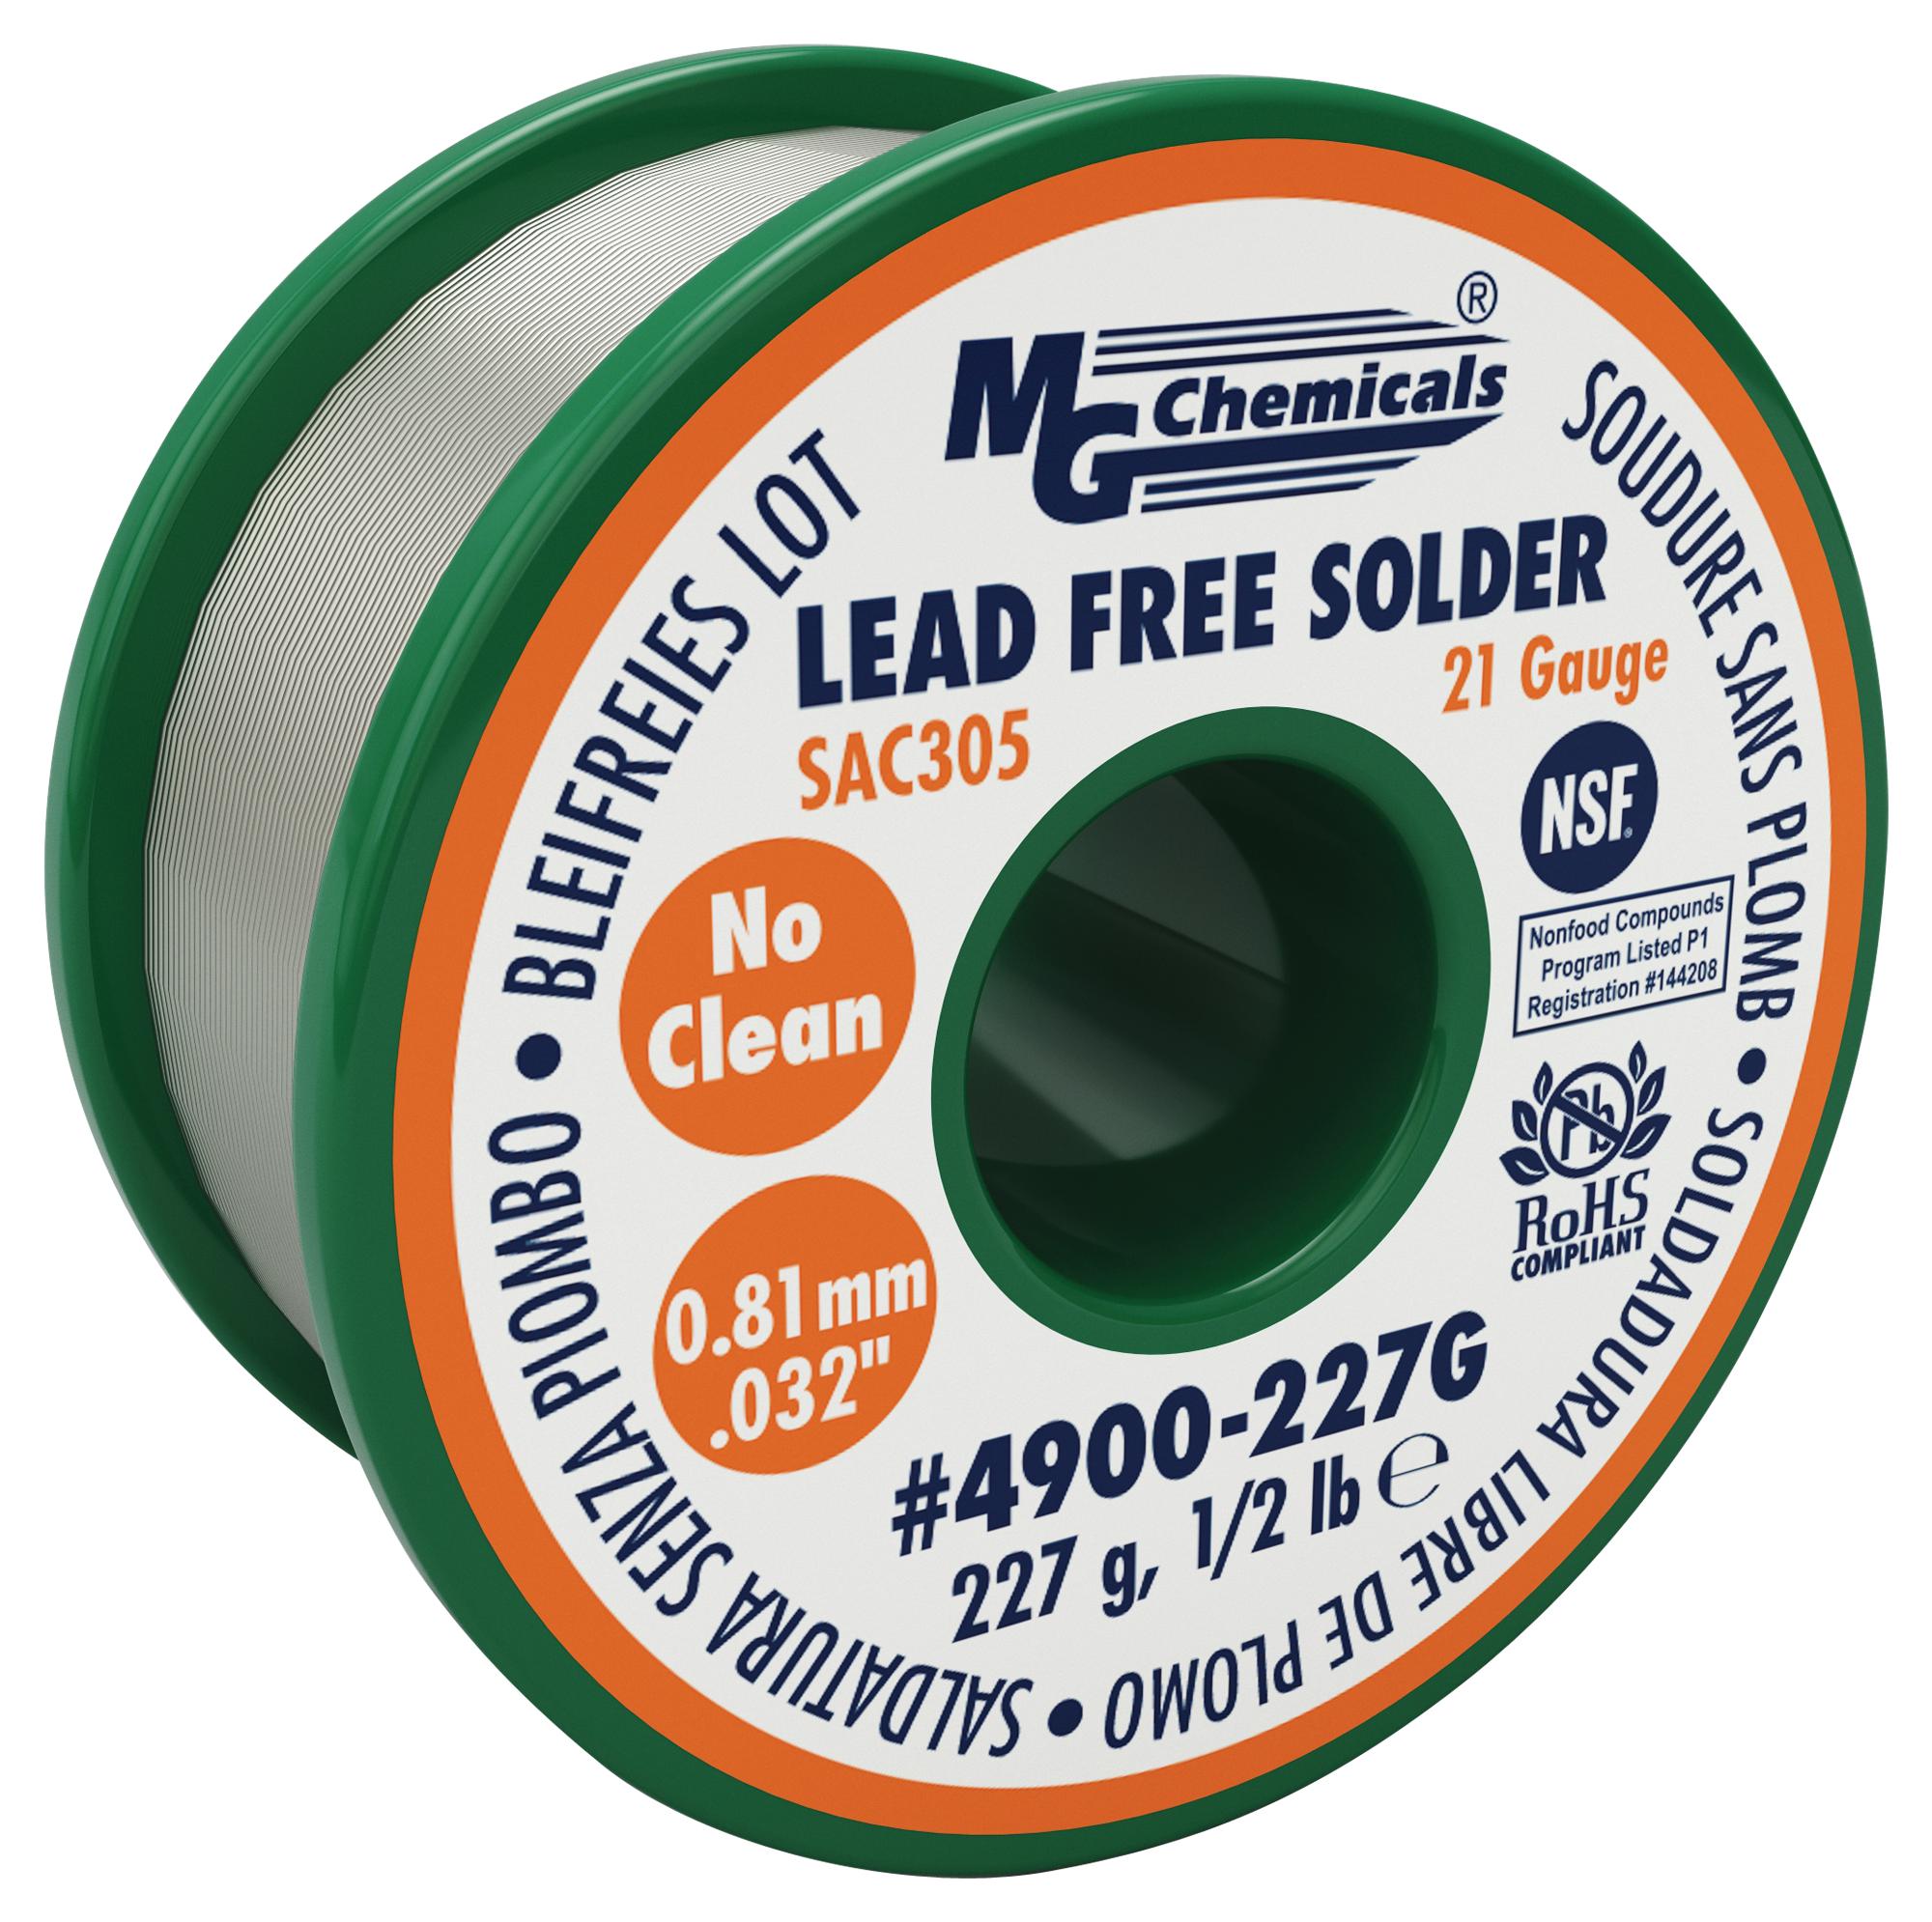 MG Chemicals 4900-227G Solder Wire, No Clean, 21Awg, 227G